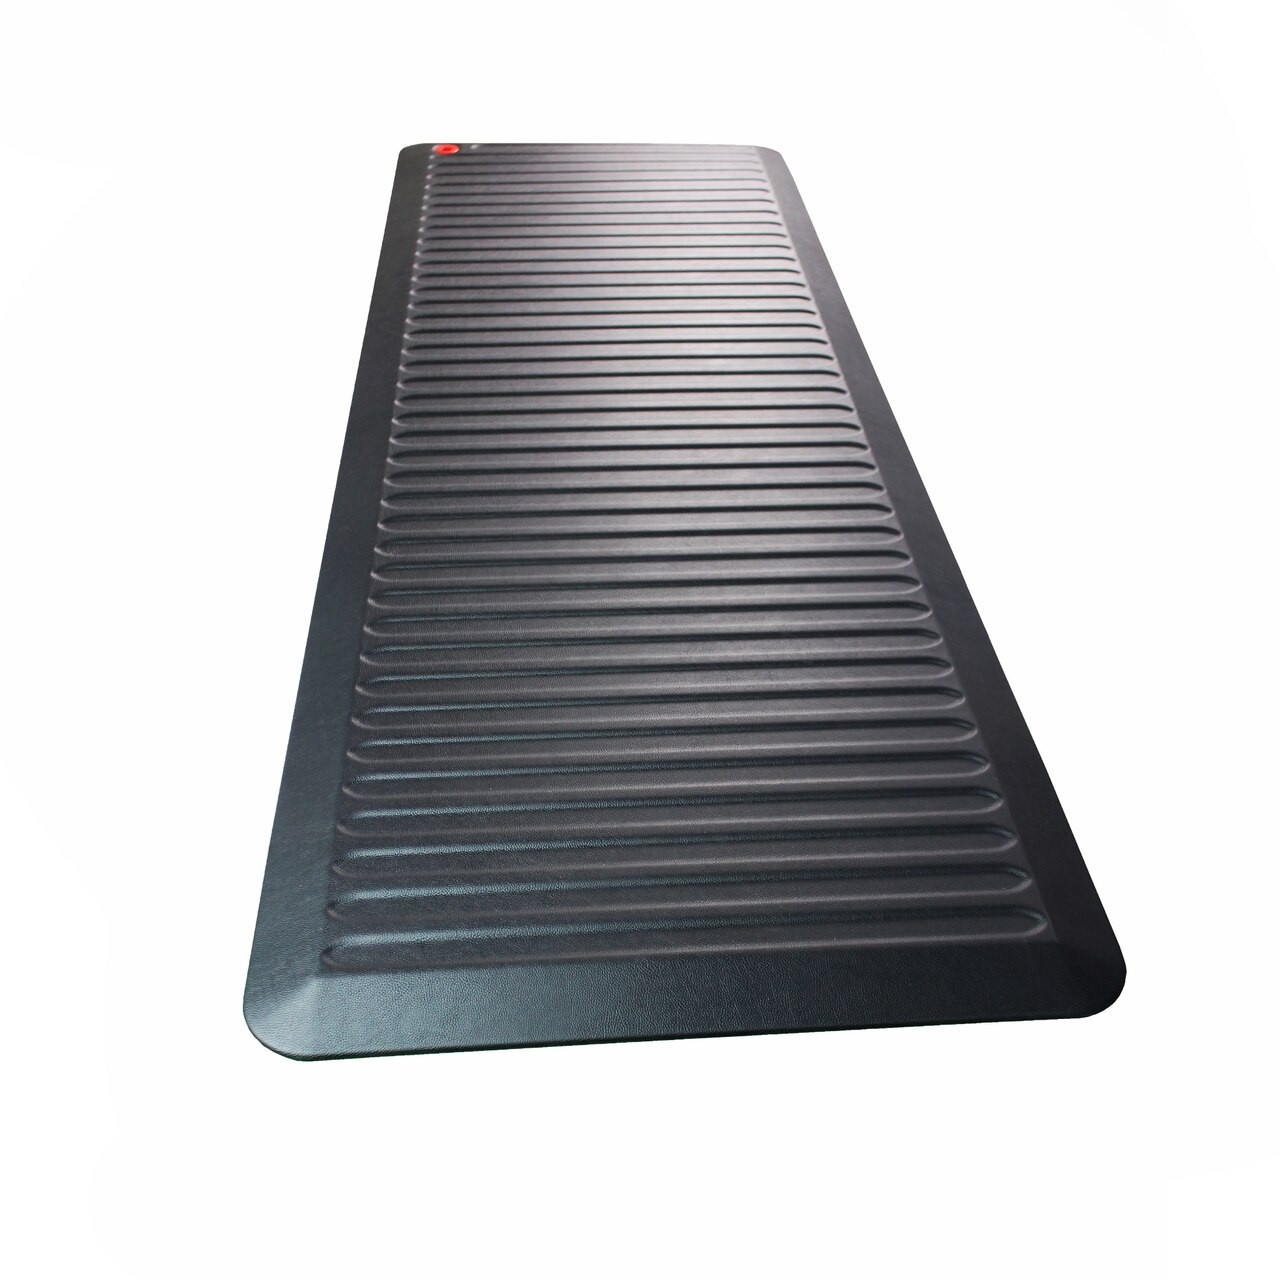 AFS-TEX System 4000X Compact Active Anti-Fatigue Mat, Perfect To Use With Standing  Desk, Black, 20 x 30